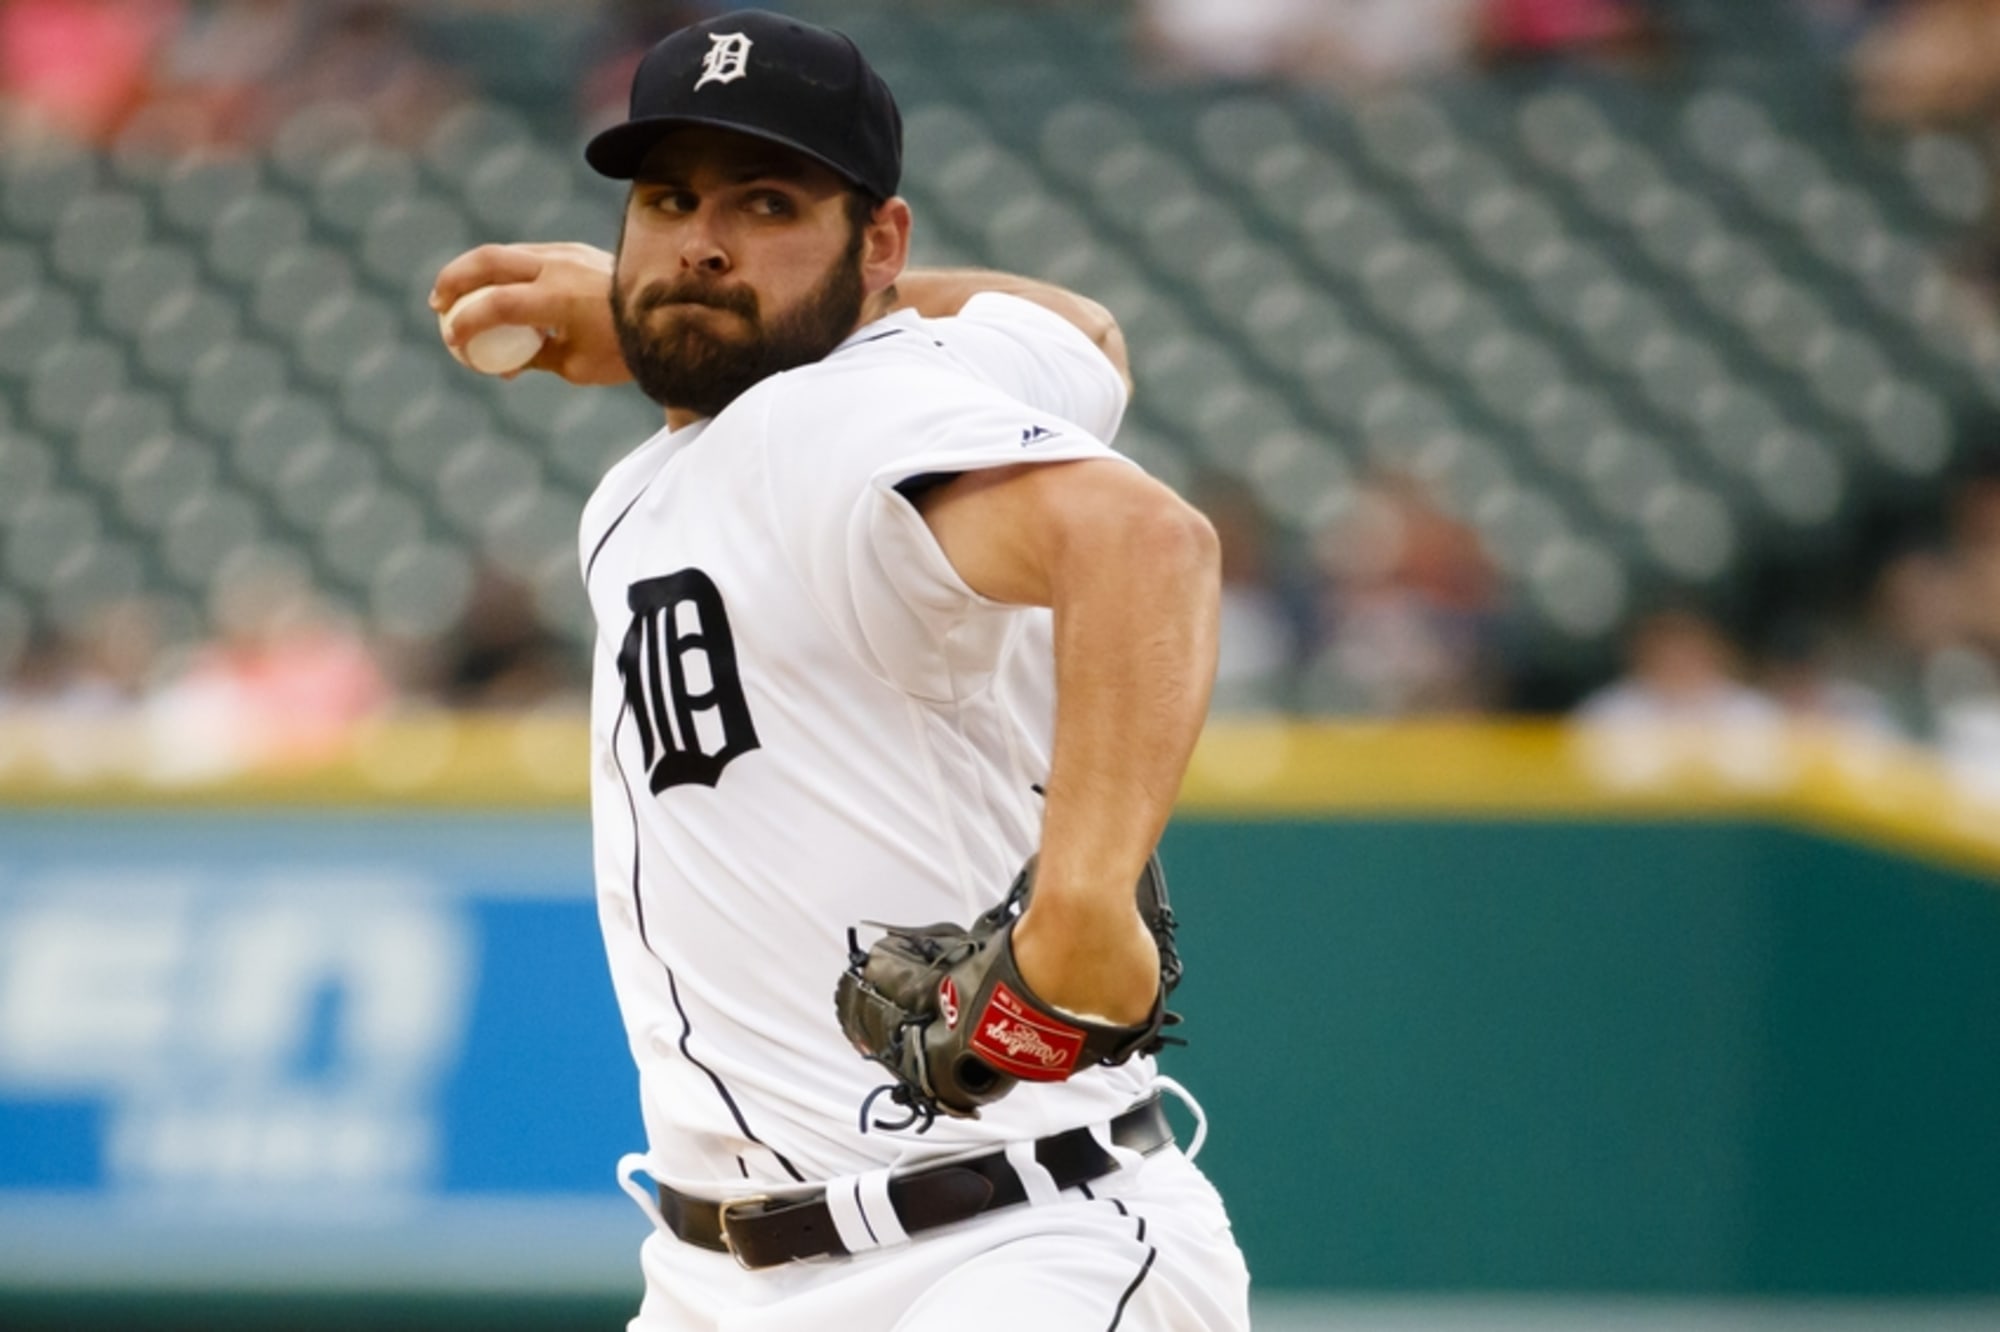 Detroit at Seattle: Tigers take down playoff-bound Mariners in